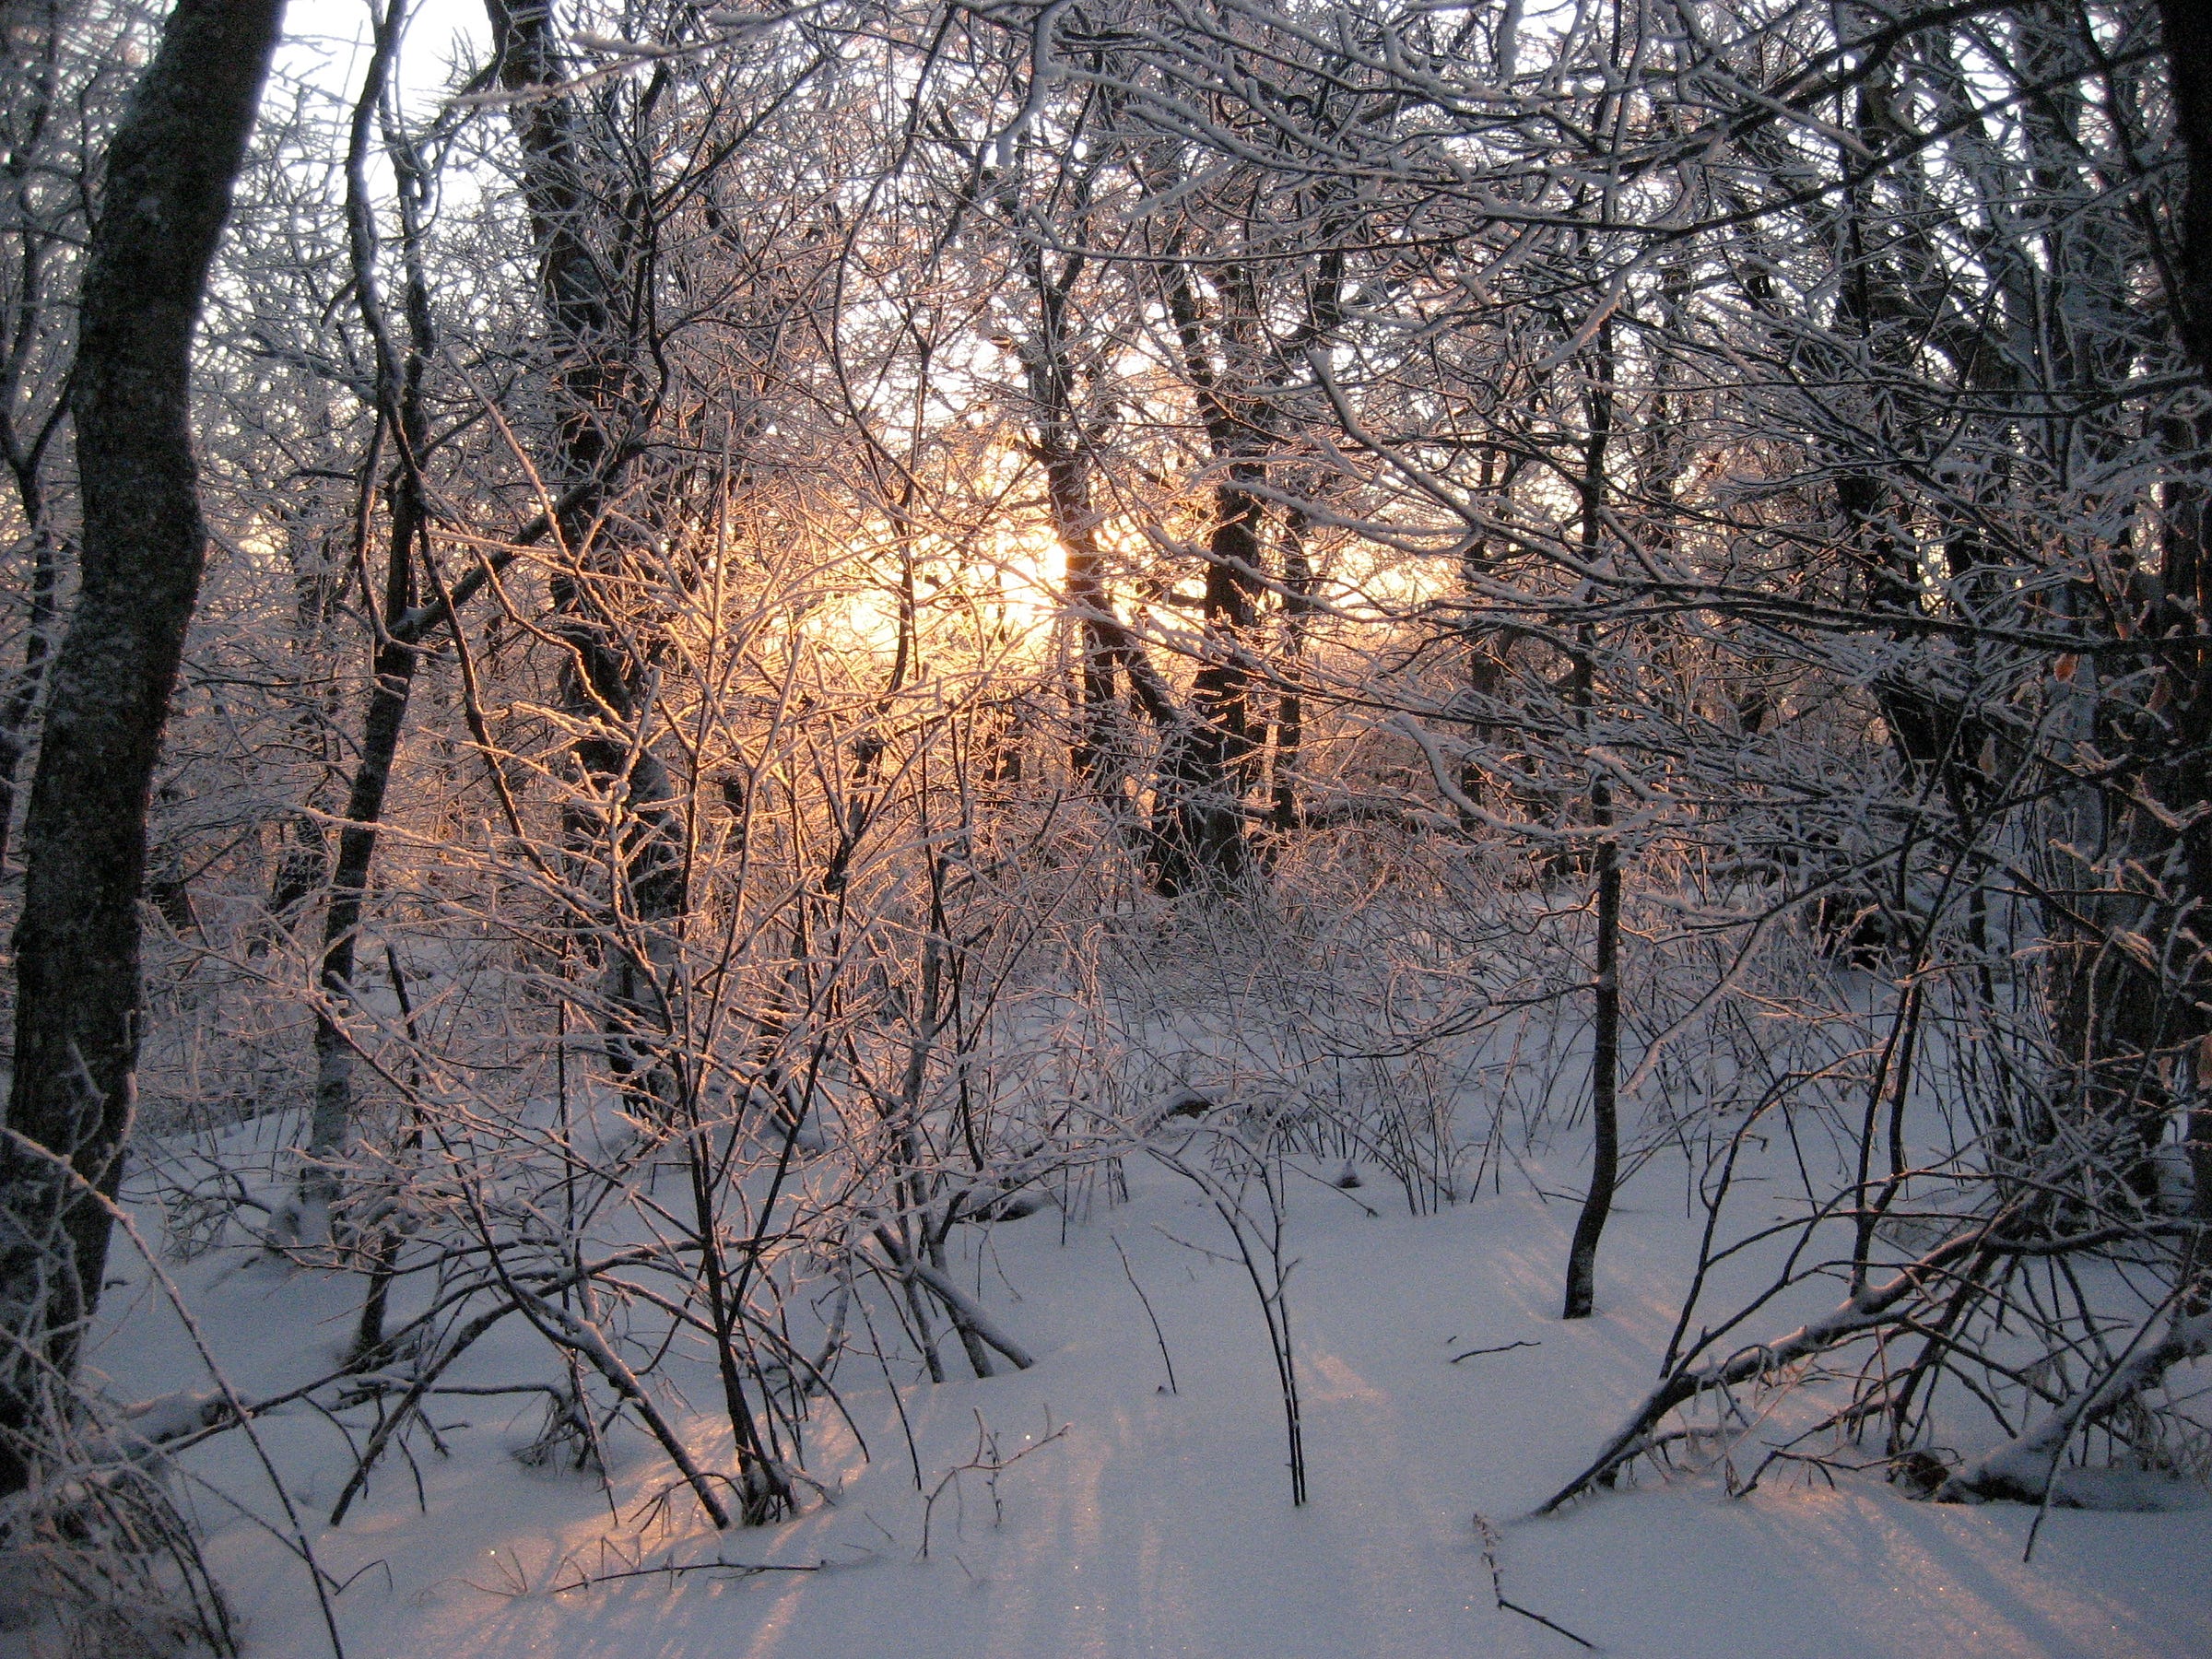 the sun sets, beyond a forest encased in ice